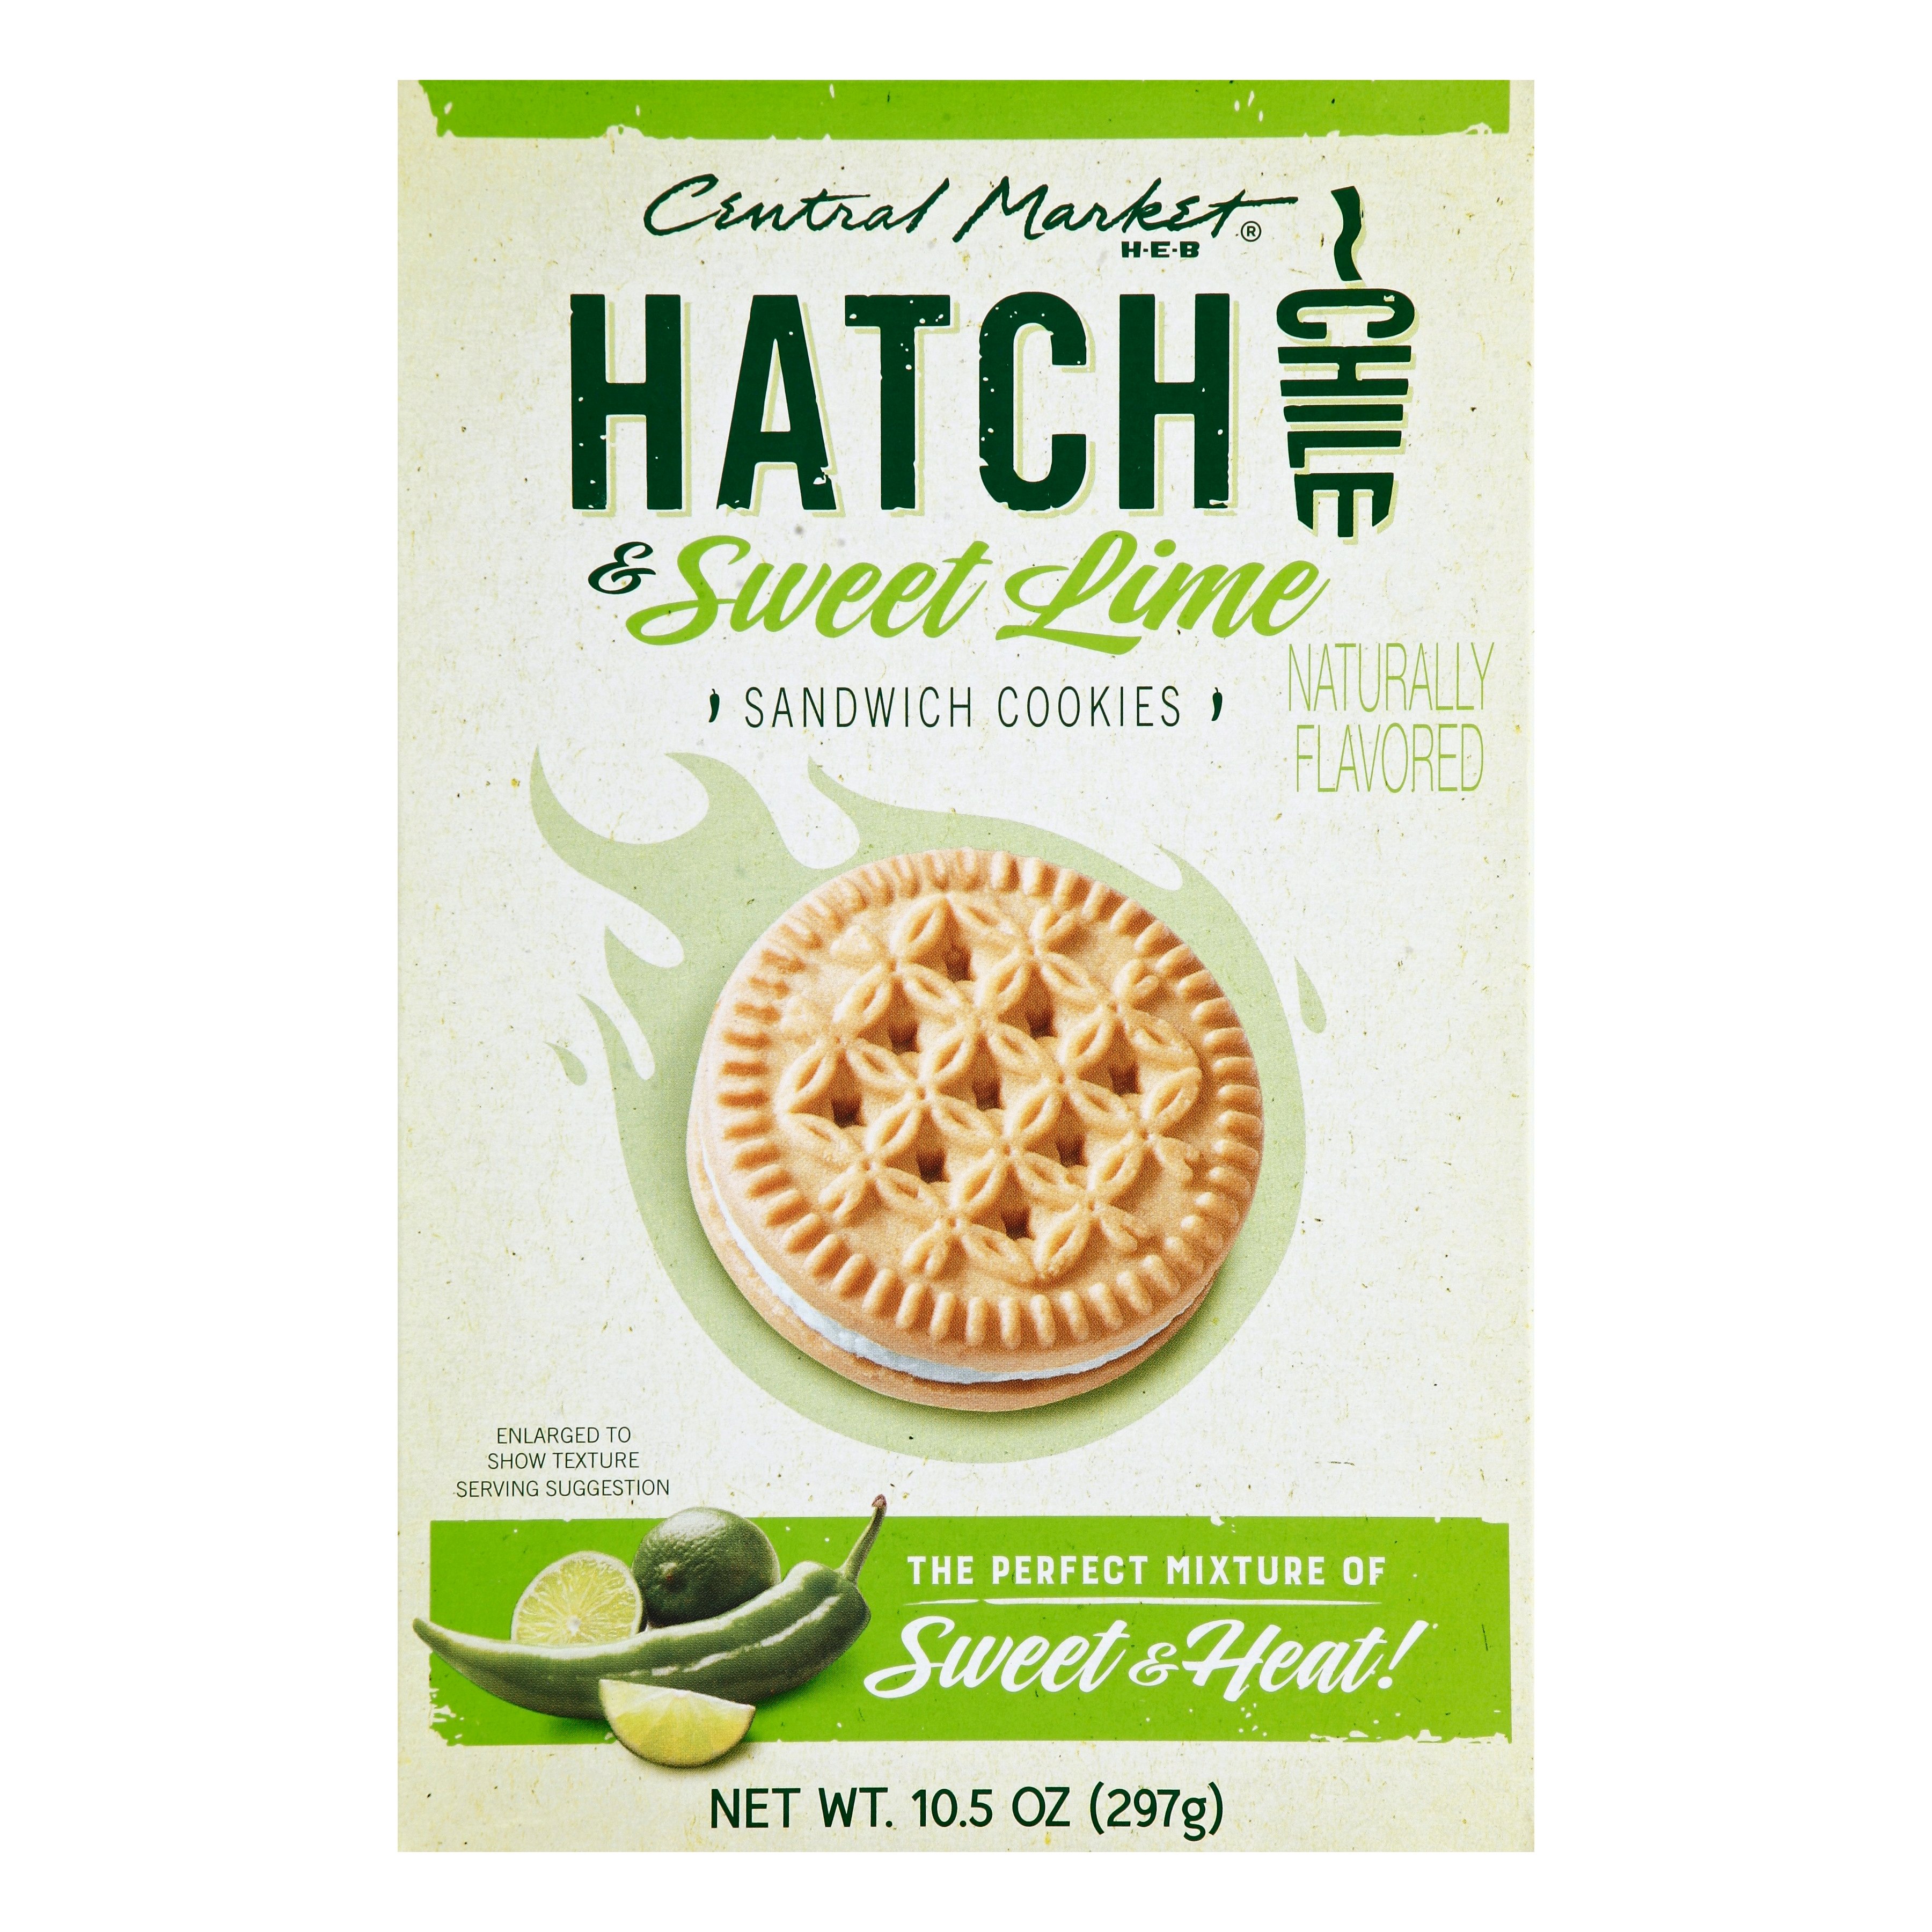 Central Market Hatch Chile Sweet Lime